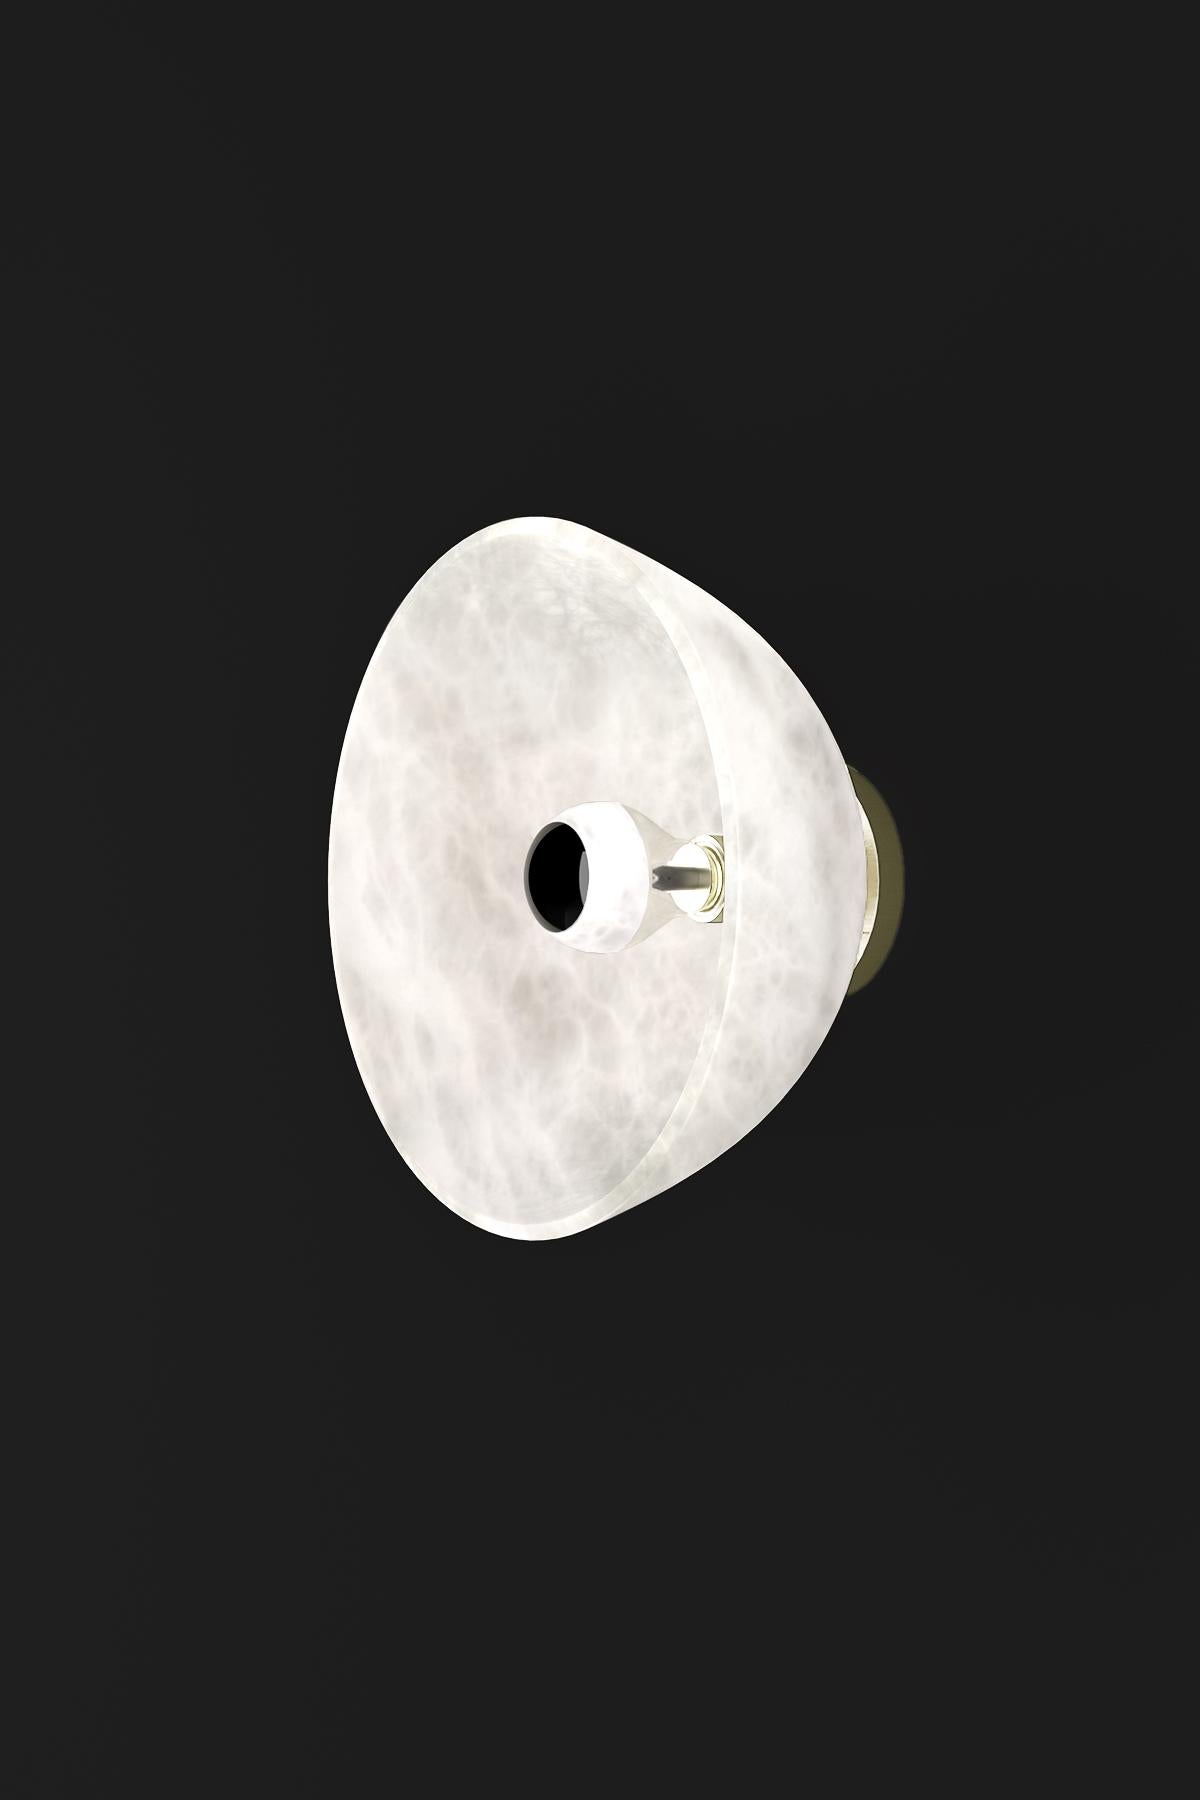 Apollo Brushed Brass Wall Lamp by Alabastro Italiano
Dimensions: Ø 30 x W 17,5 cm.
Materials: White alabaster and brass.

Available in different finishes: Shiny Silver, Bronze, Brushed Brass, Ruggine of Florence, Brushed Burnished, Shiny Gold,